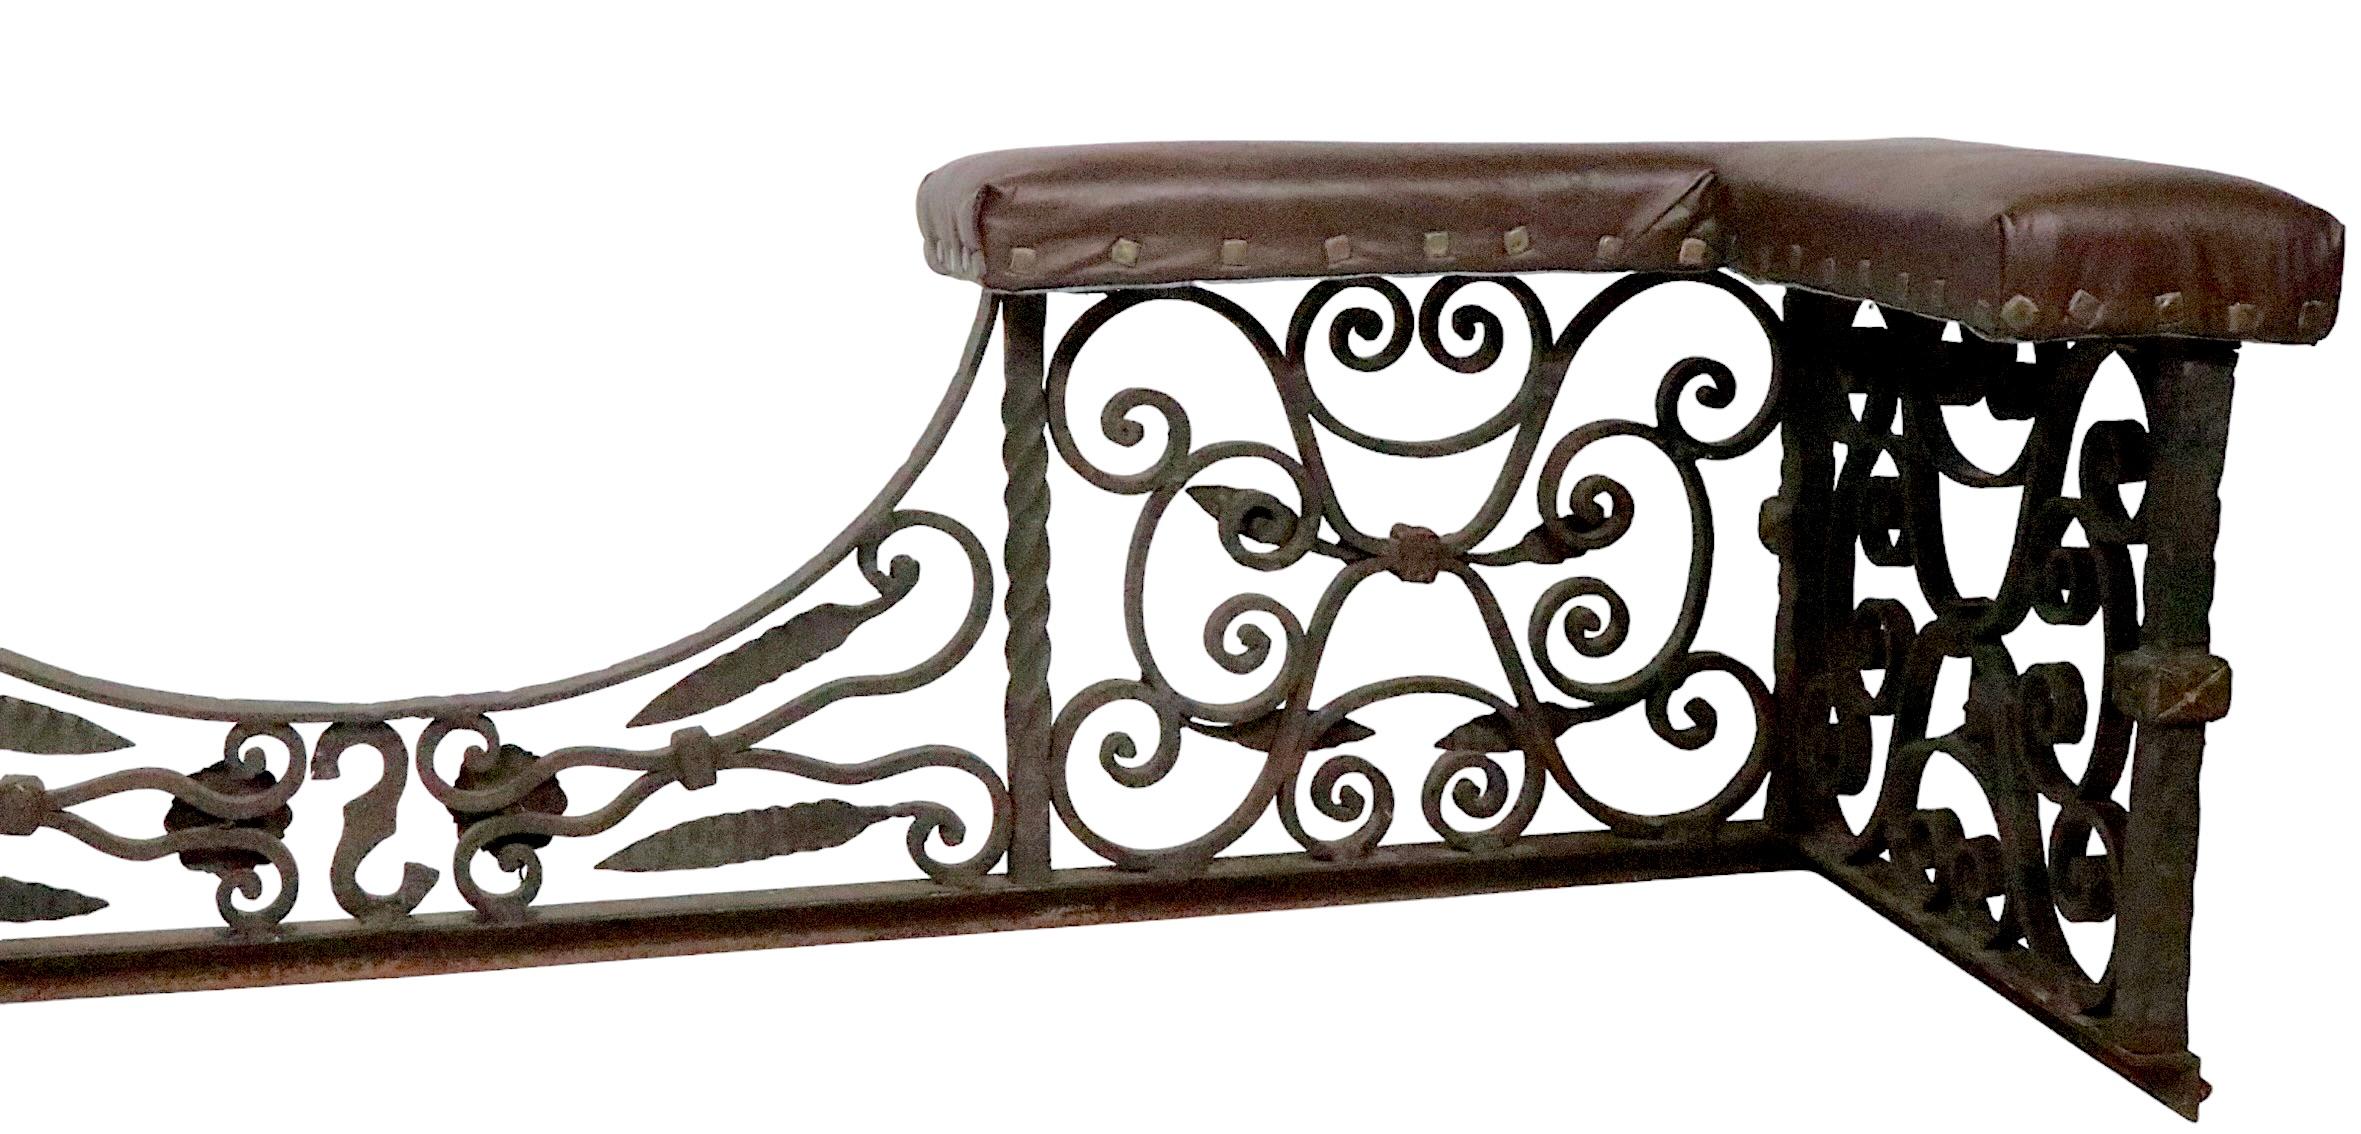 Antique Arts and Crafts Gothic Spanish Style Wrought Iron Bench Club Fender For Sale 12